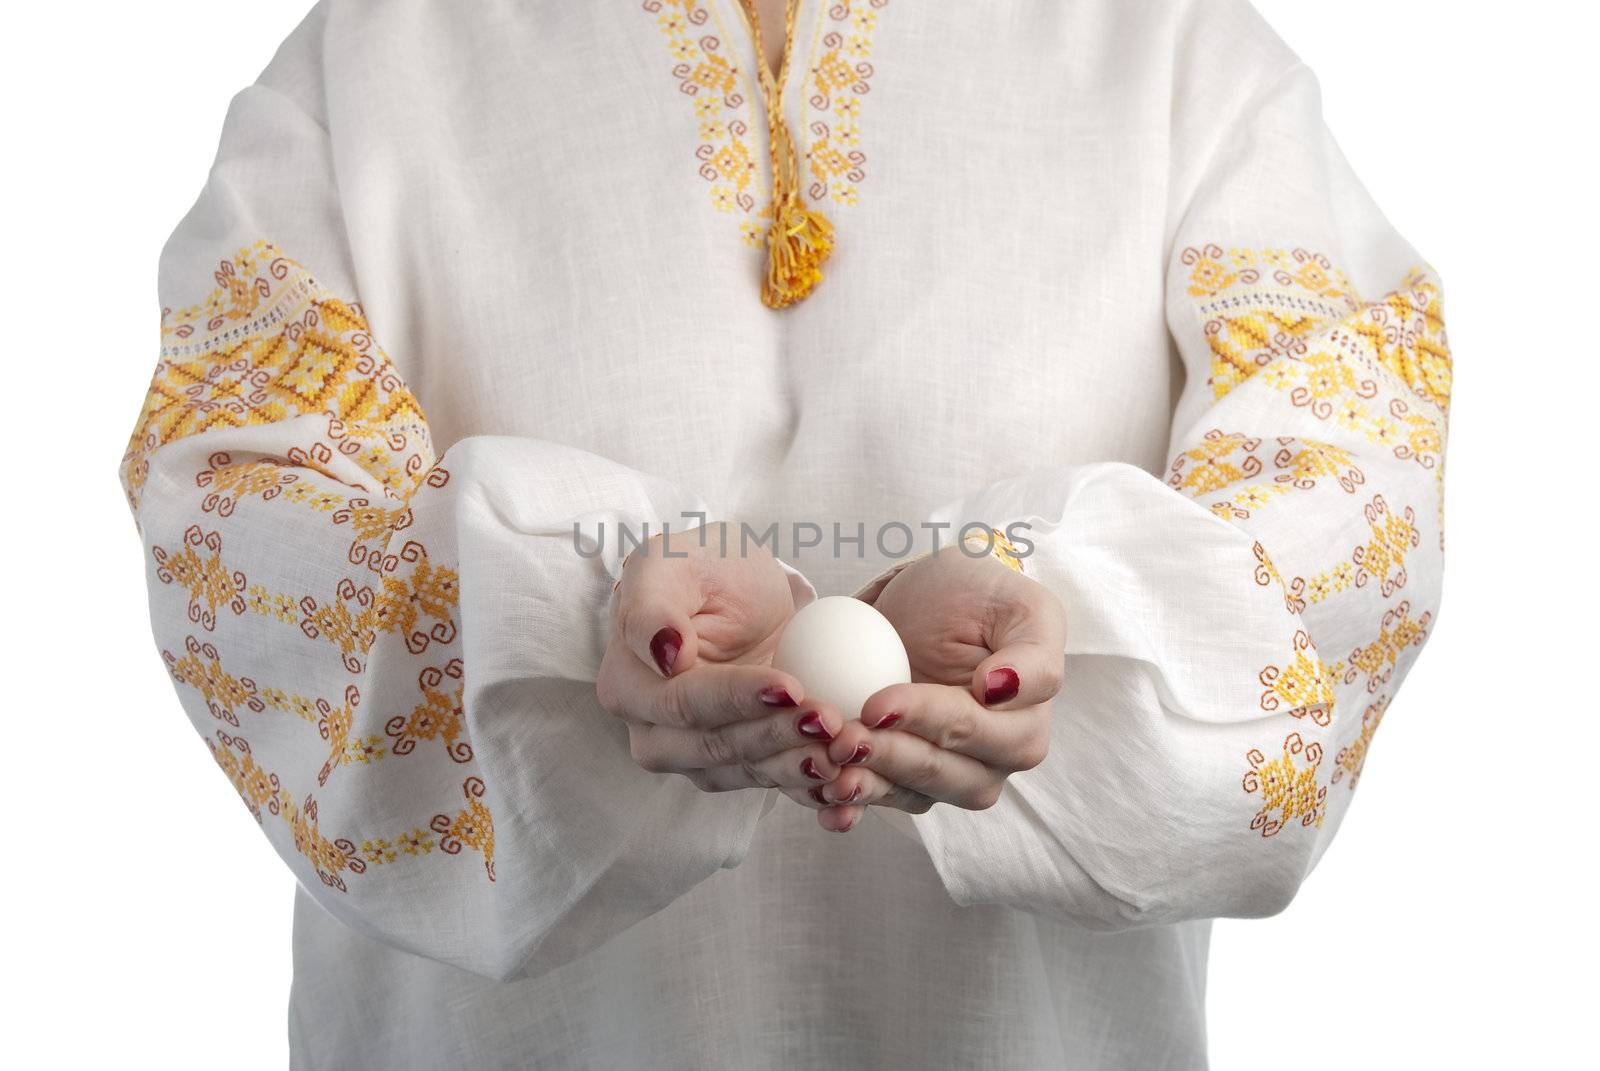 Woman's hands holding the egg by kirs-ua